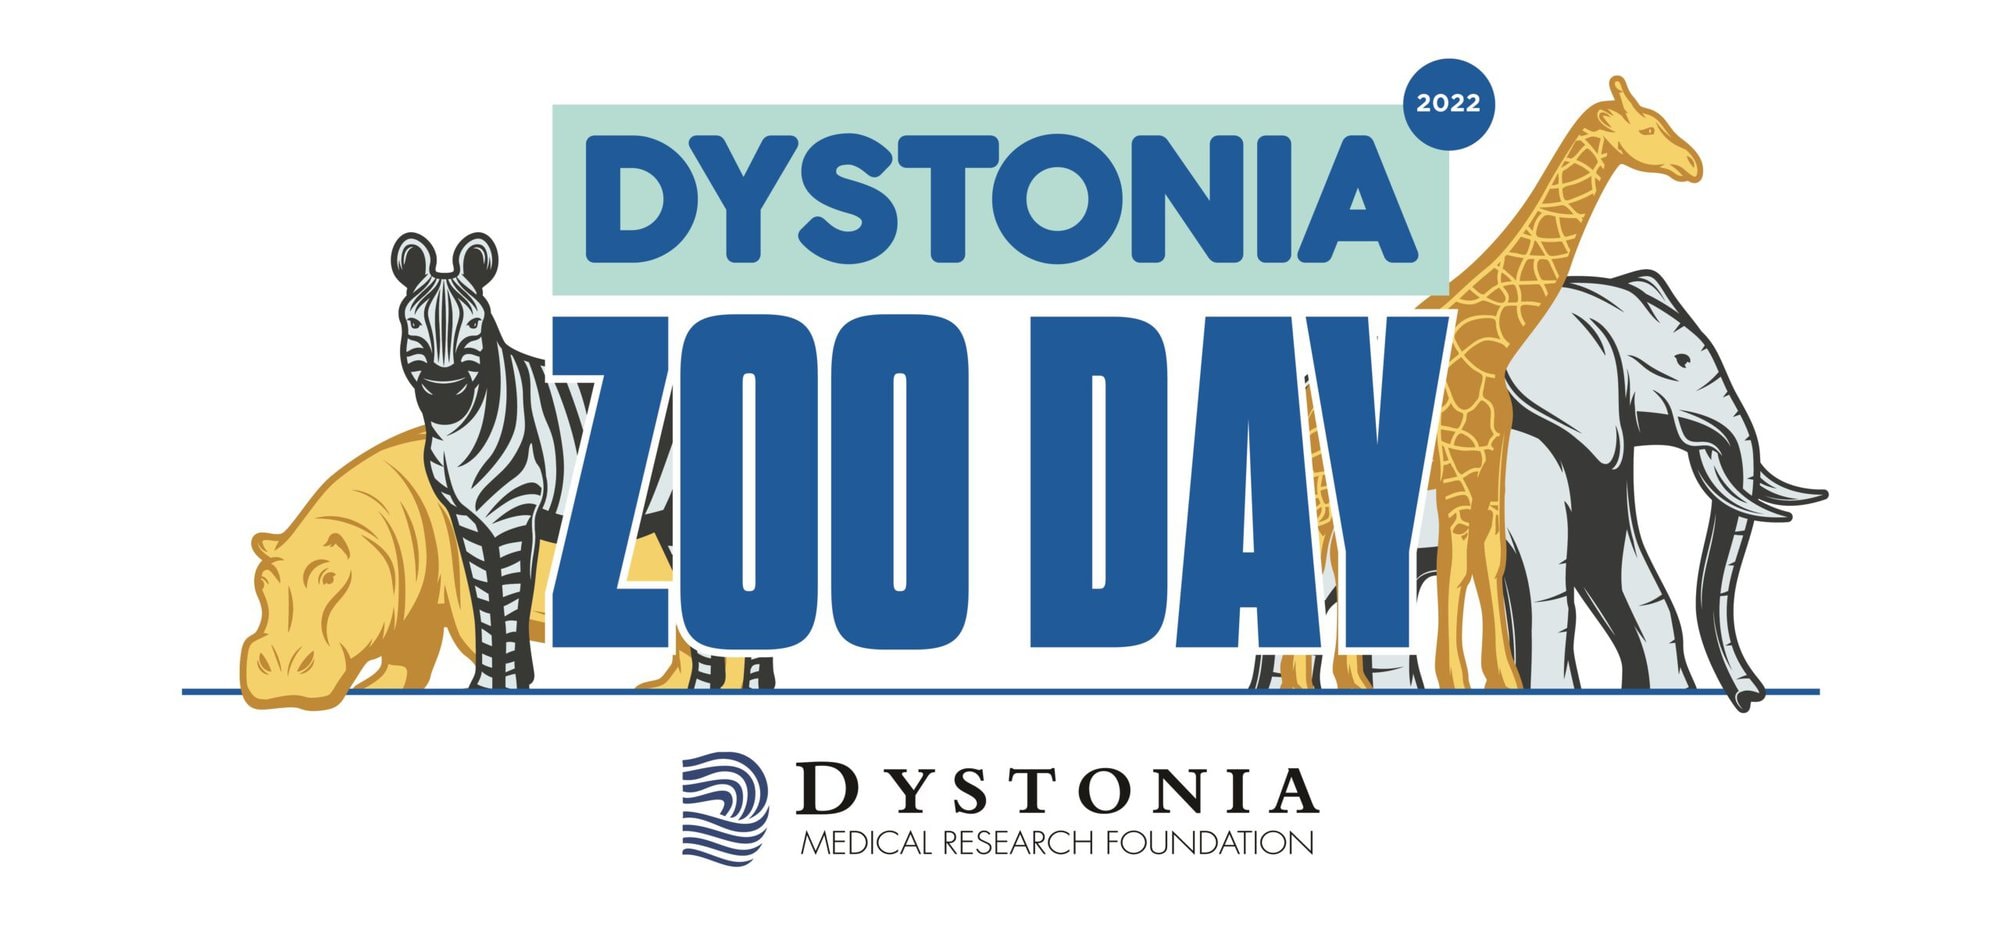 Logo that reads "Dystonia Zoo Day 2022" with illustrations of animals.